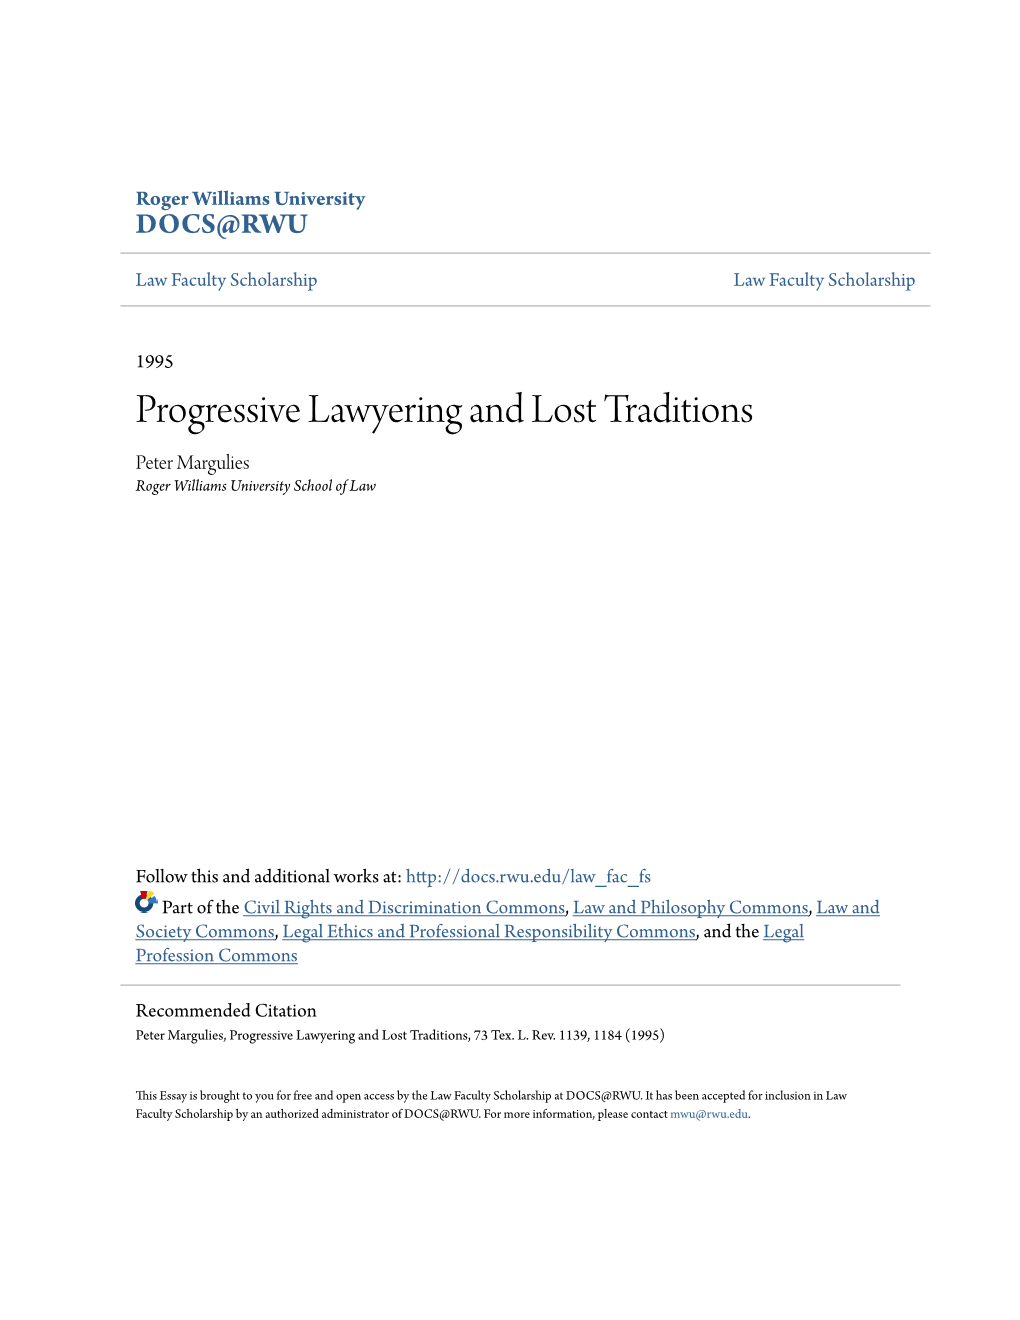 Progressive Lawyering and Lost Traditions Peter Margulies Roger Williams University School of Law